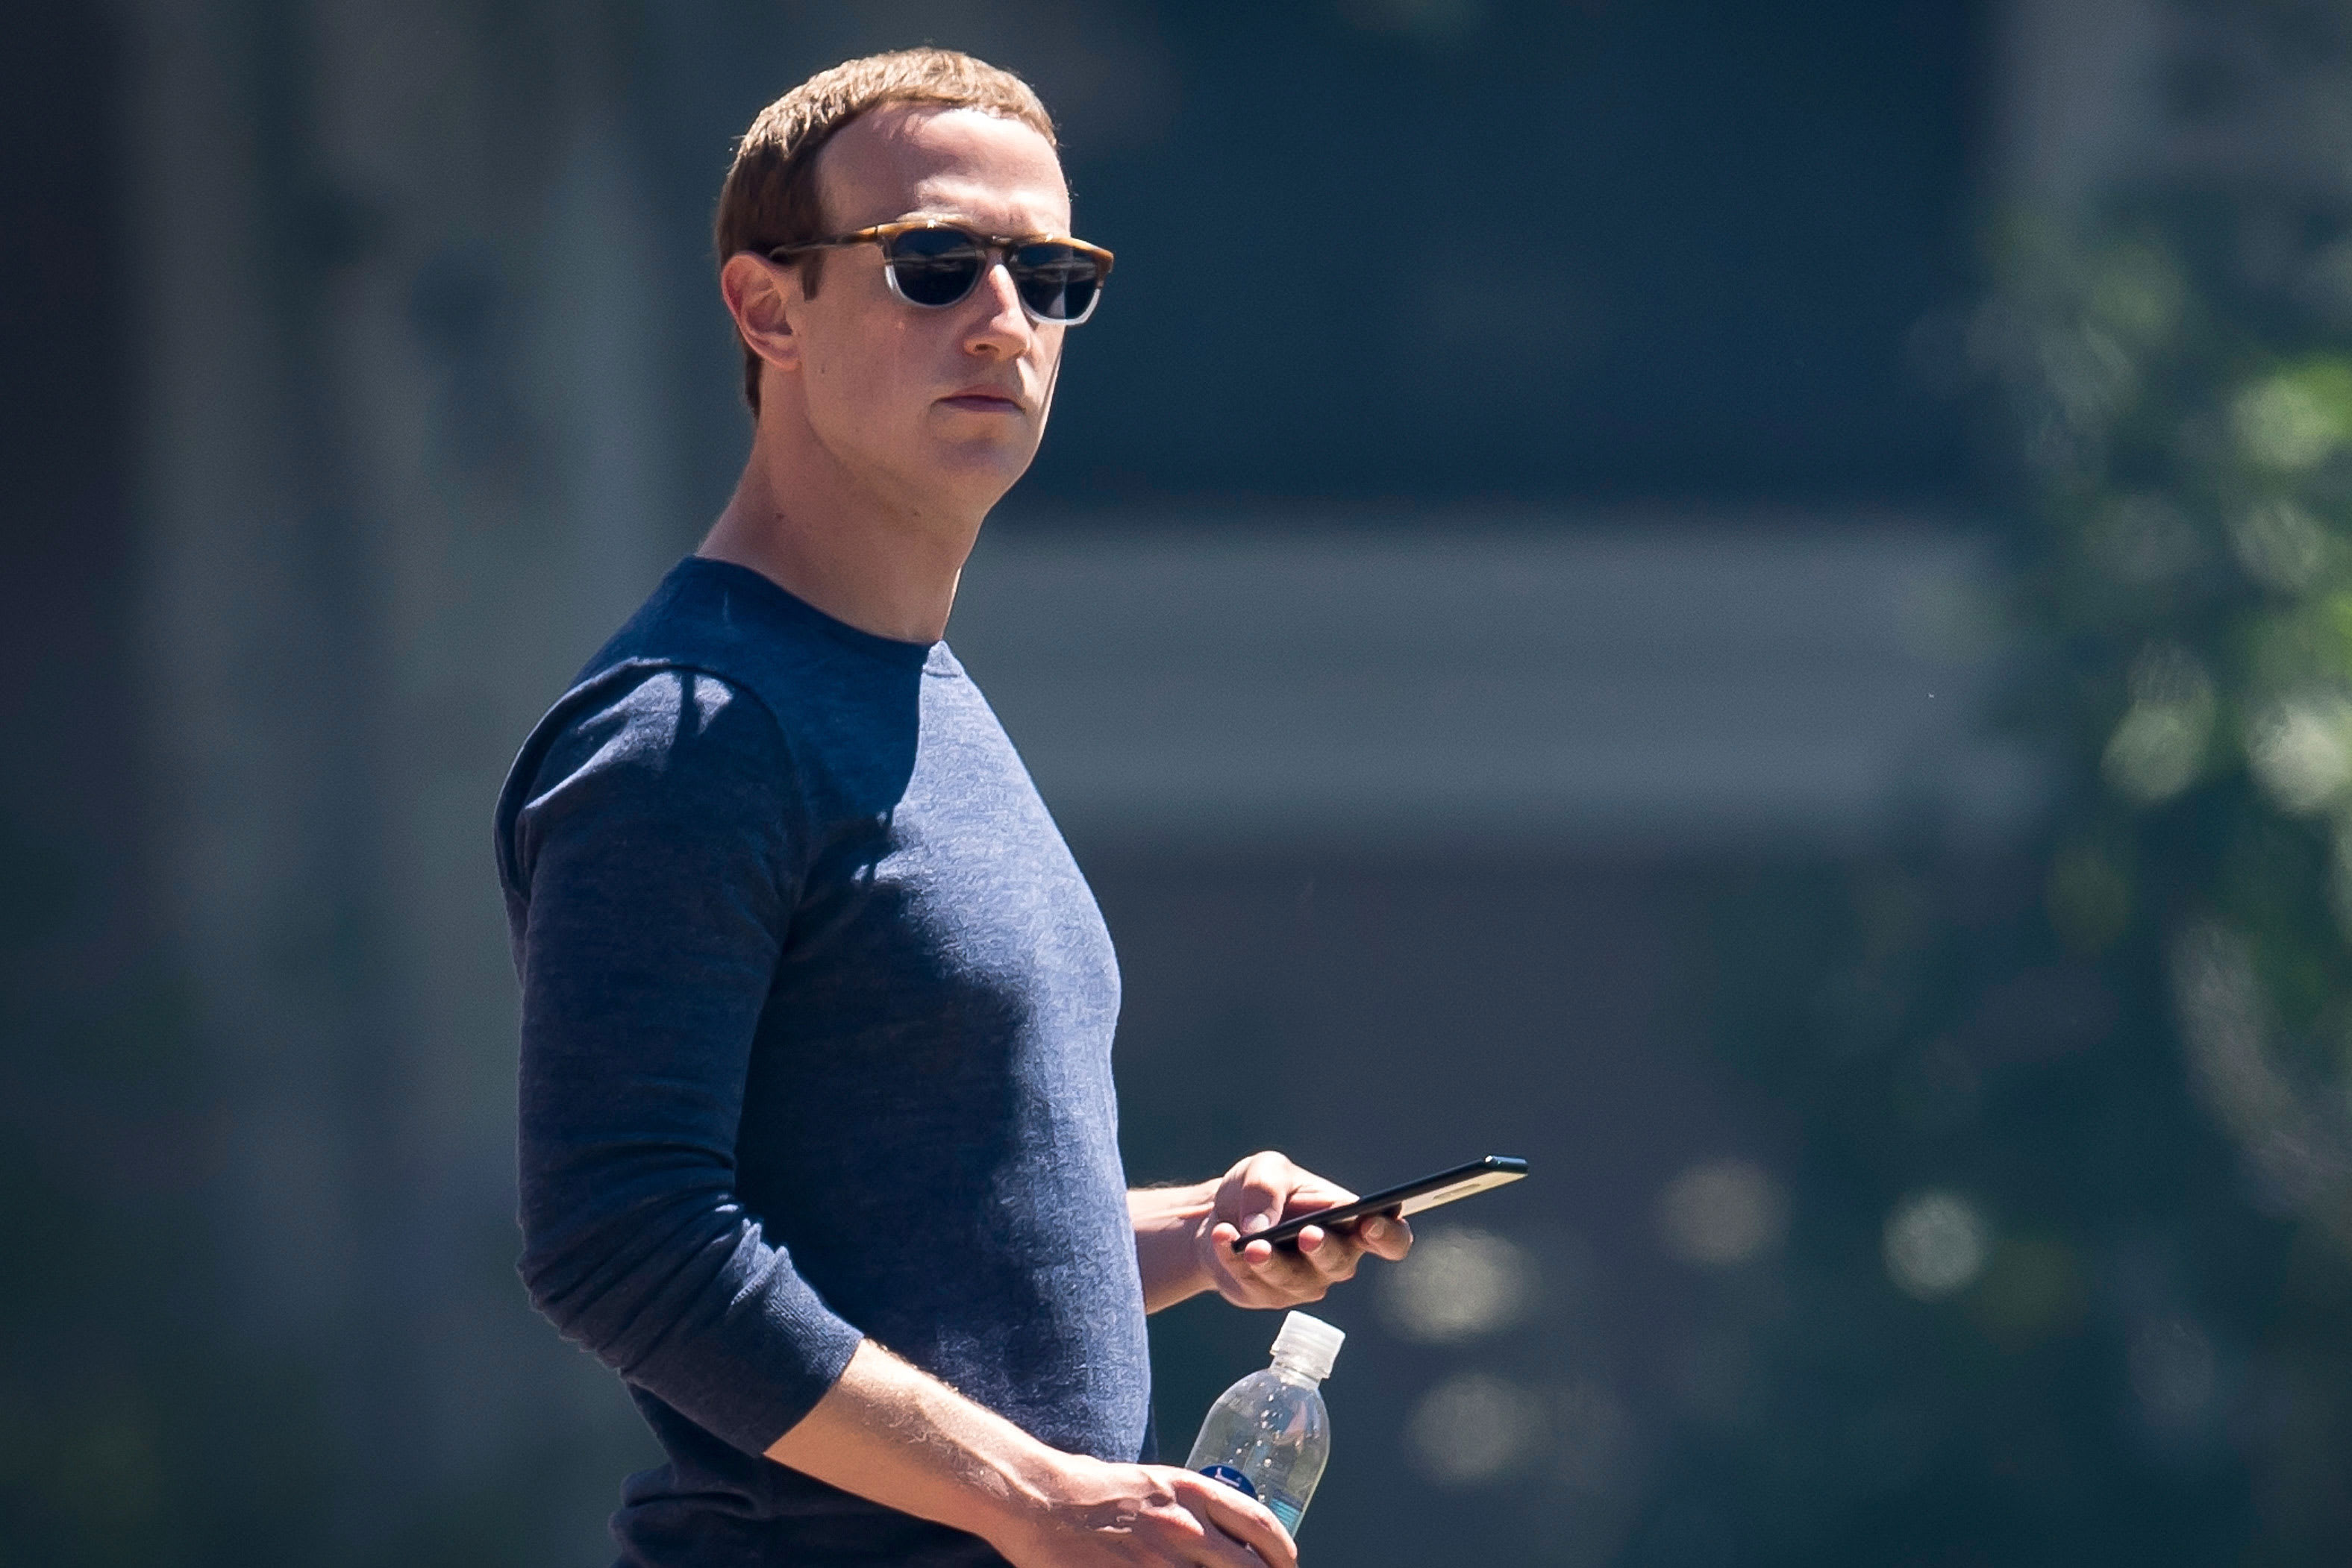 Stocks making the biggest moves midday: Facebook, DocuSign & more